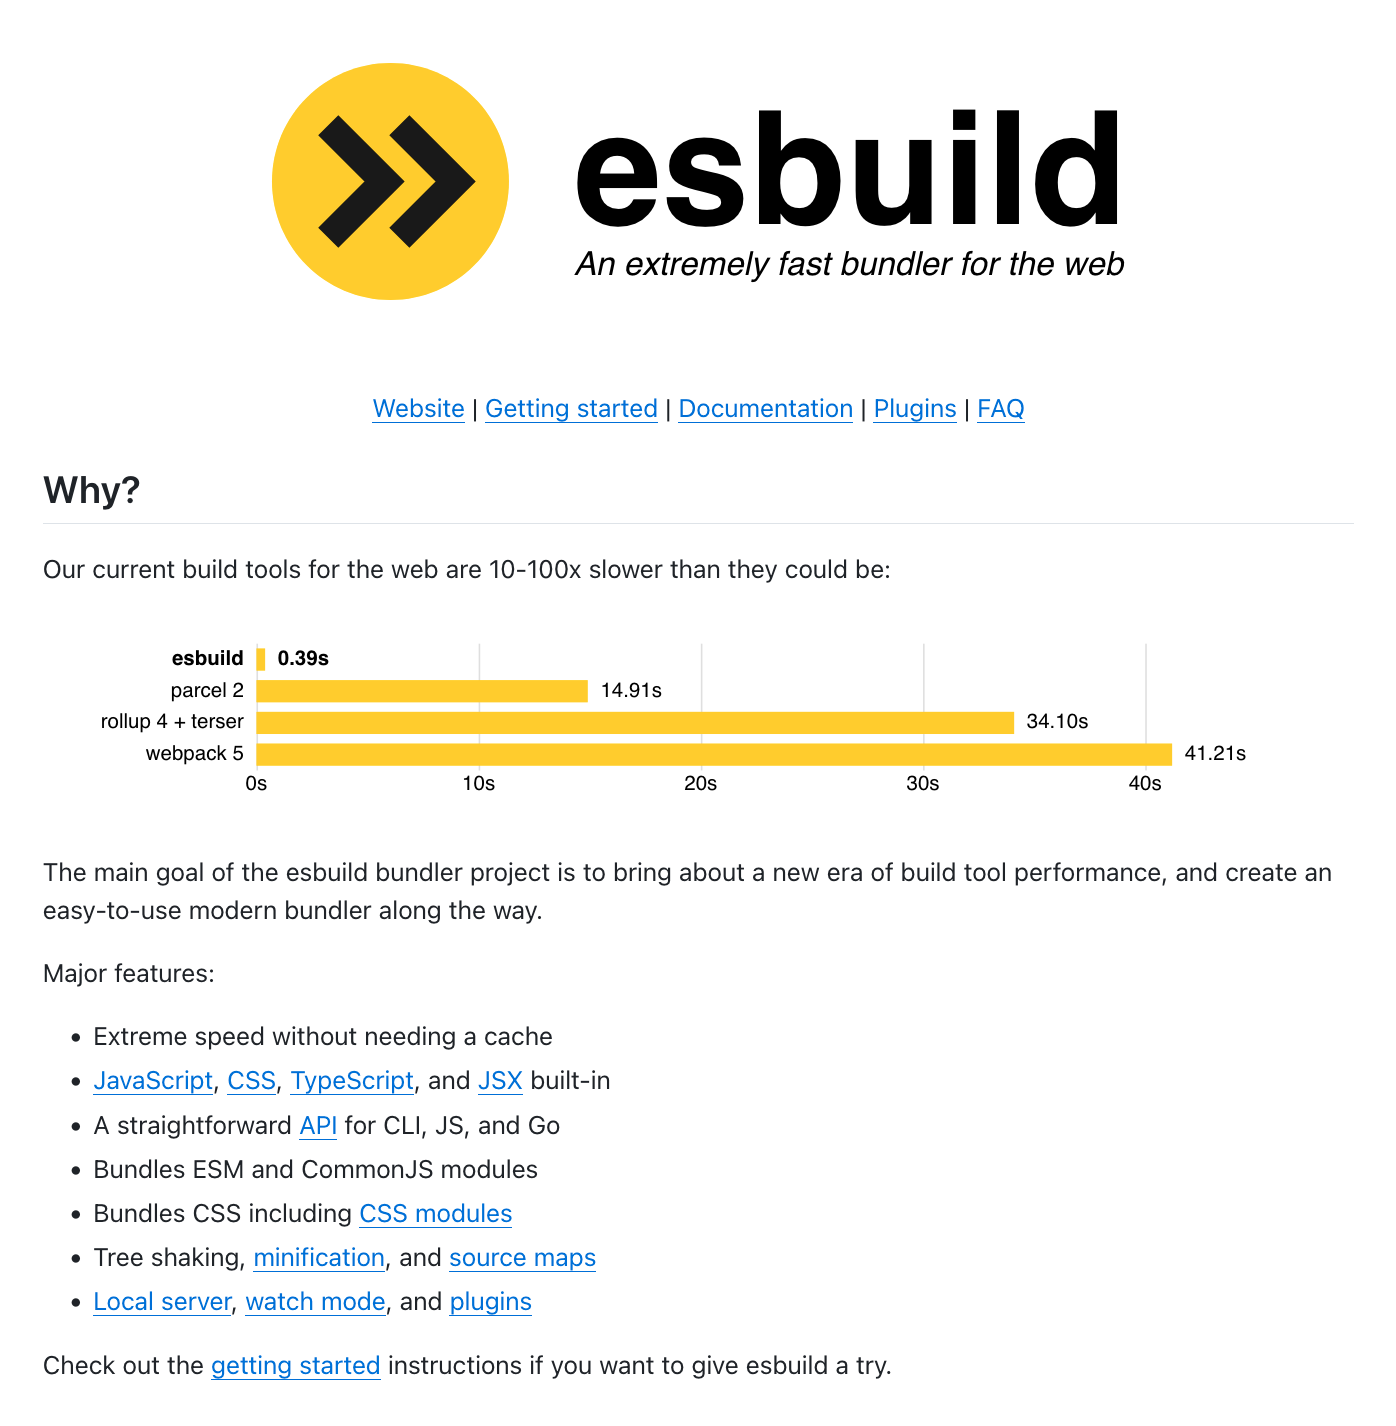 The short README for esbuild, with a logo, links, and a brief explanation of why someone would choose it over other bundlers.